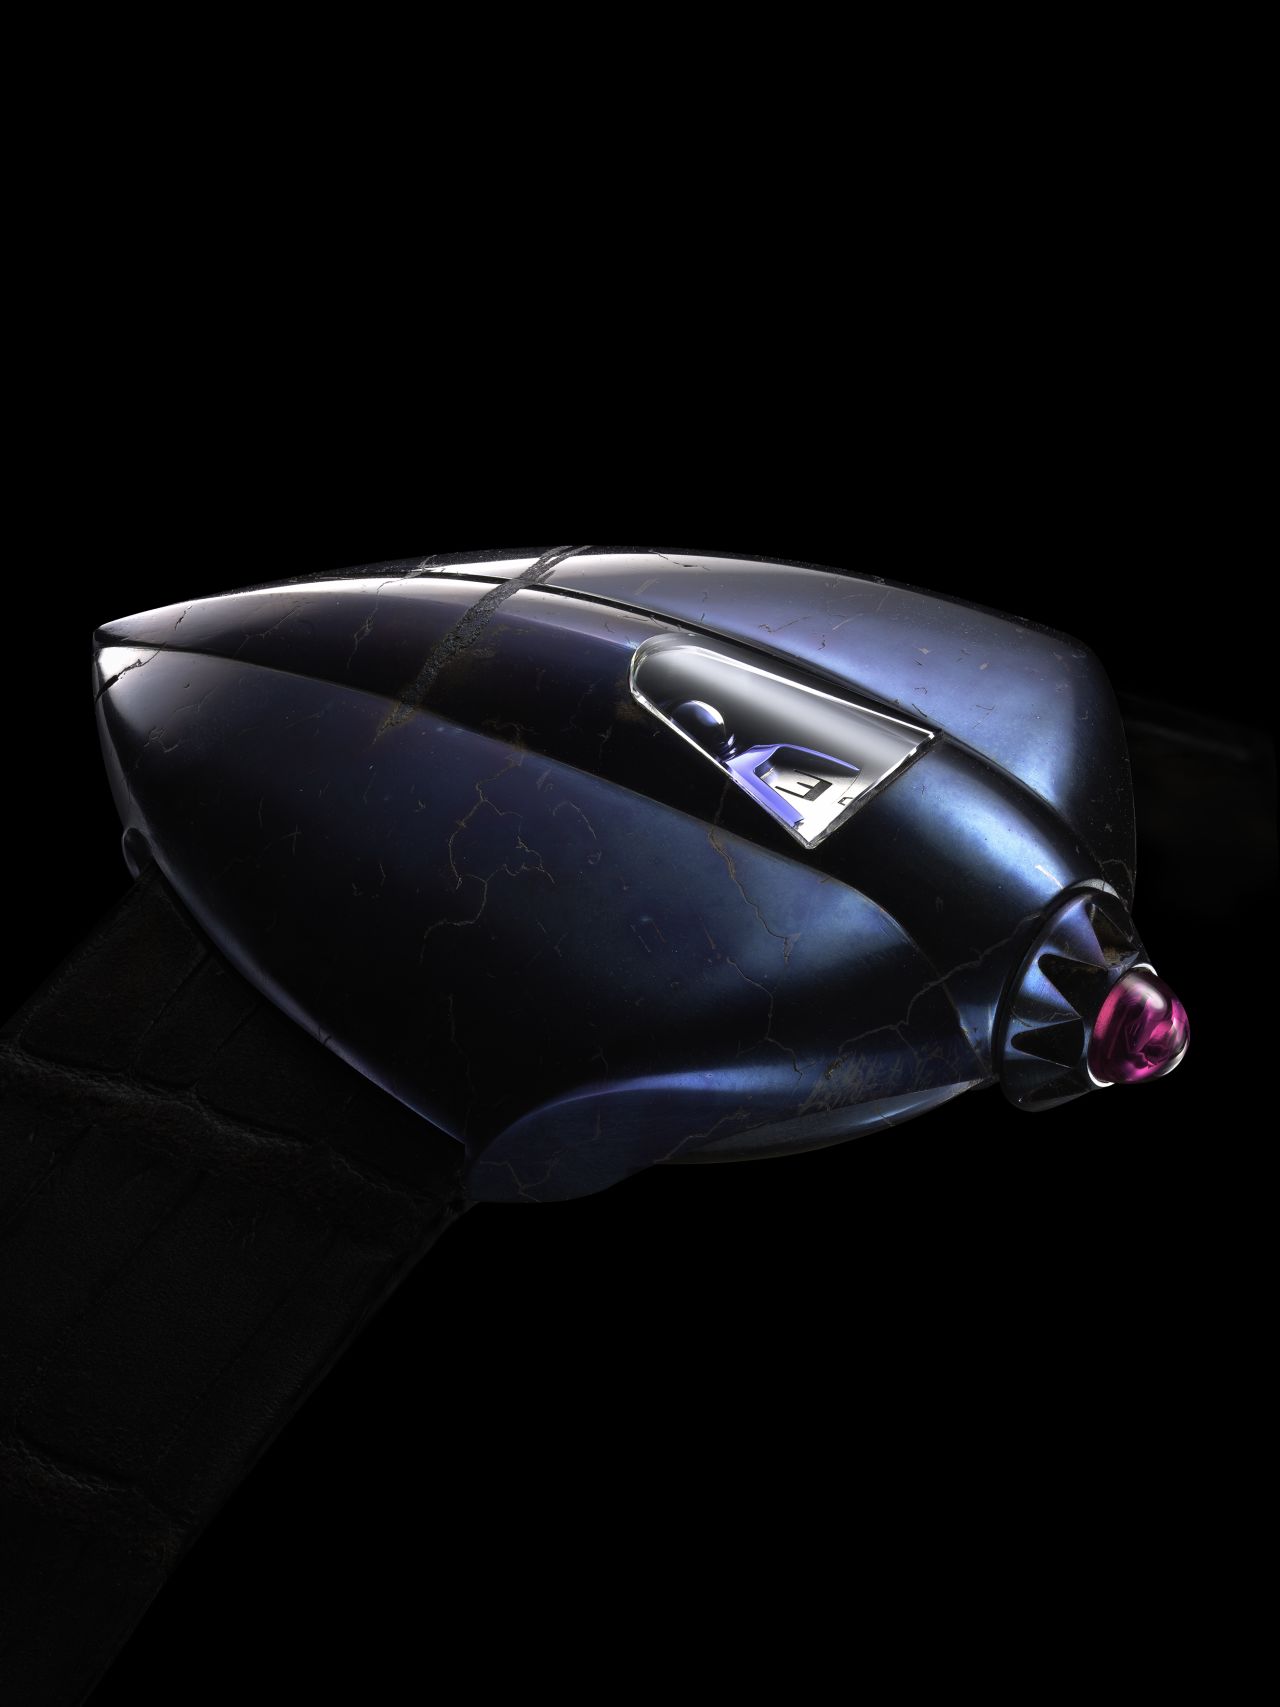 De Bethune's Dream Watch 5, has a unique sculptural design in titanium. The brand, founded in 2002, is a collaboration between famed collector David Zanetta and fourth-generation watchmaker Denis Flageollet. They are know for designs that incorporate both modern and traditional design elements, with an aesthetic that is often celestially inspired.